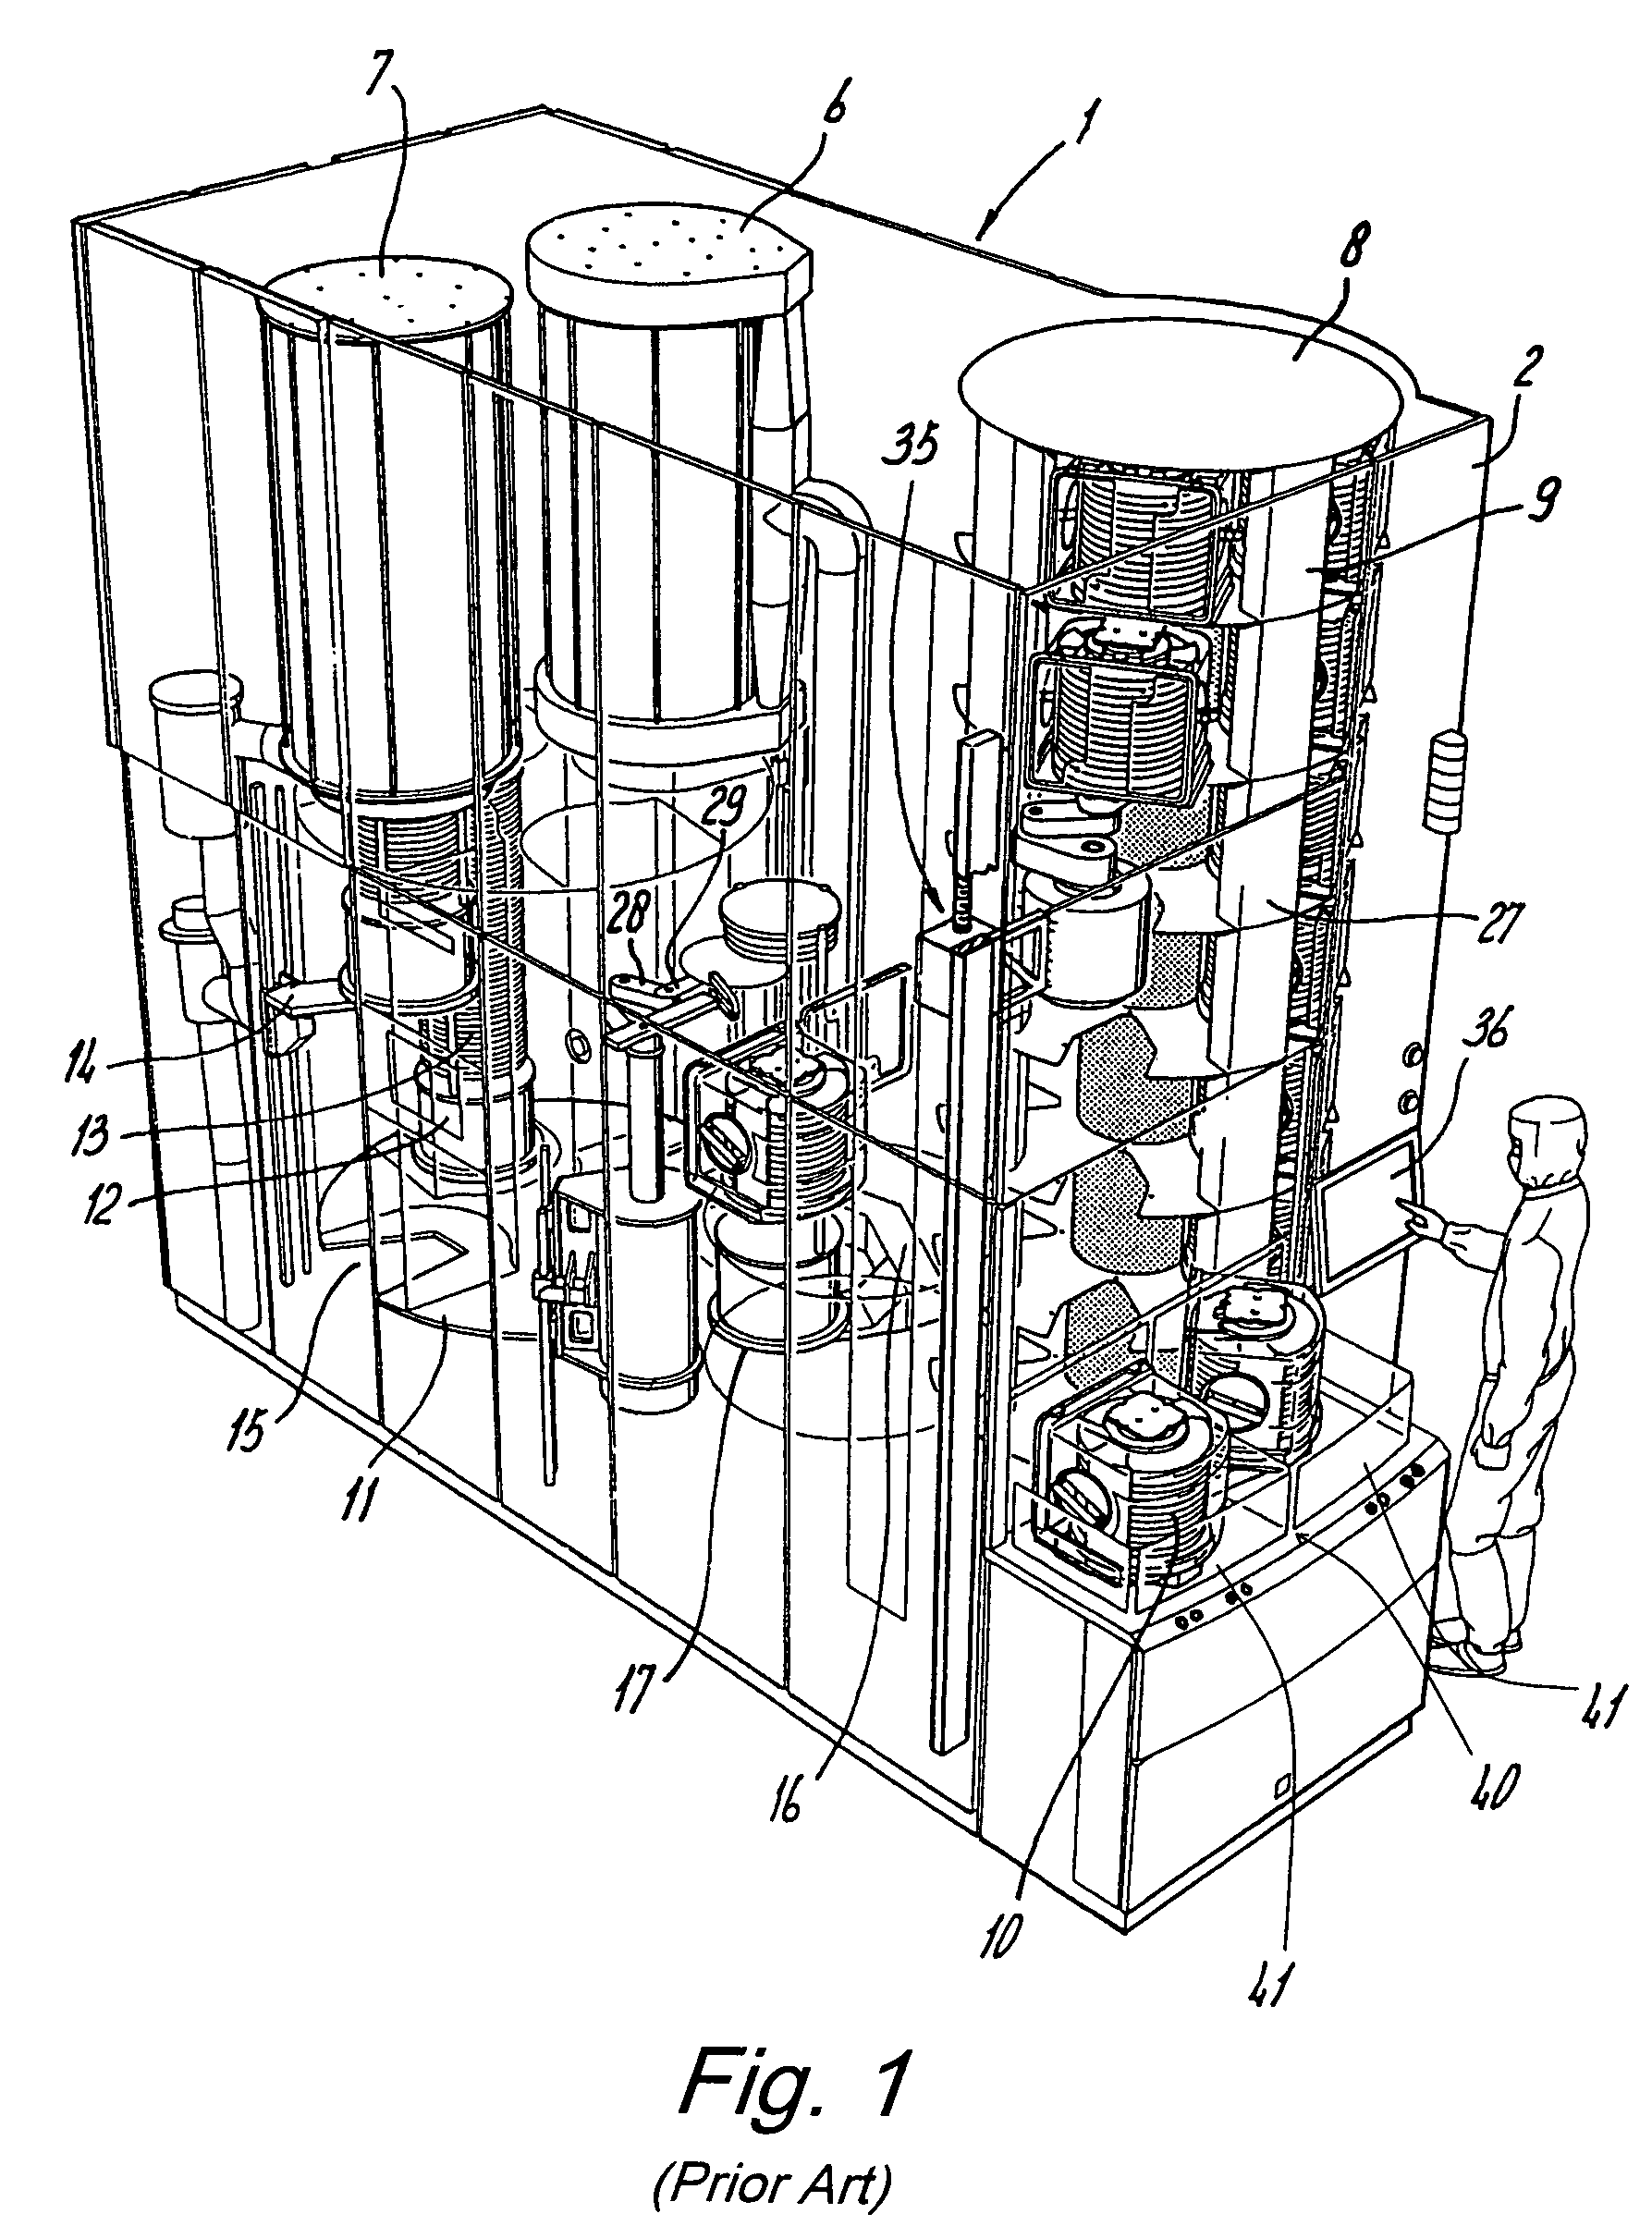 Processing system with increased cassette storage capacity